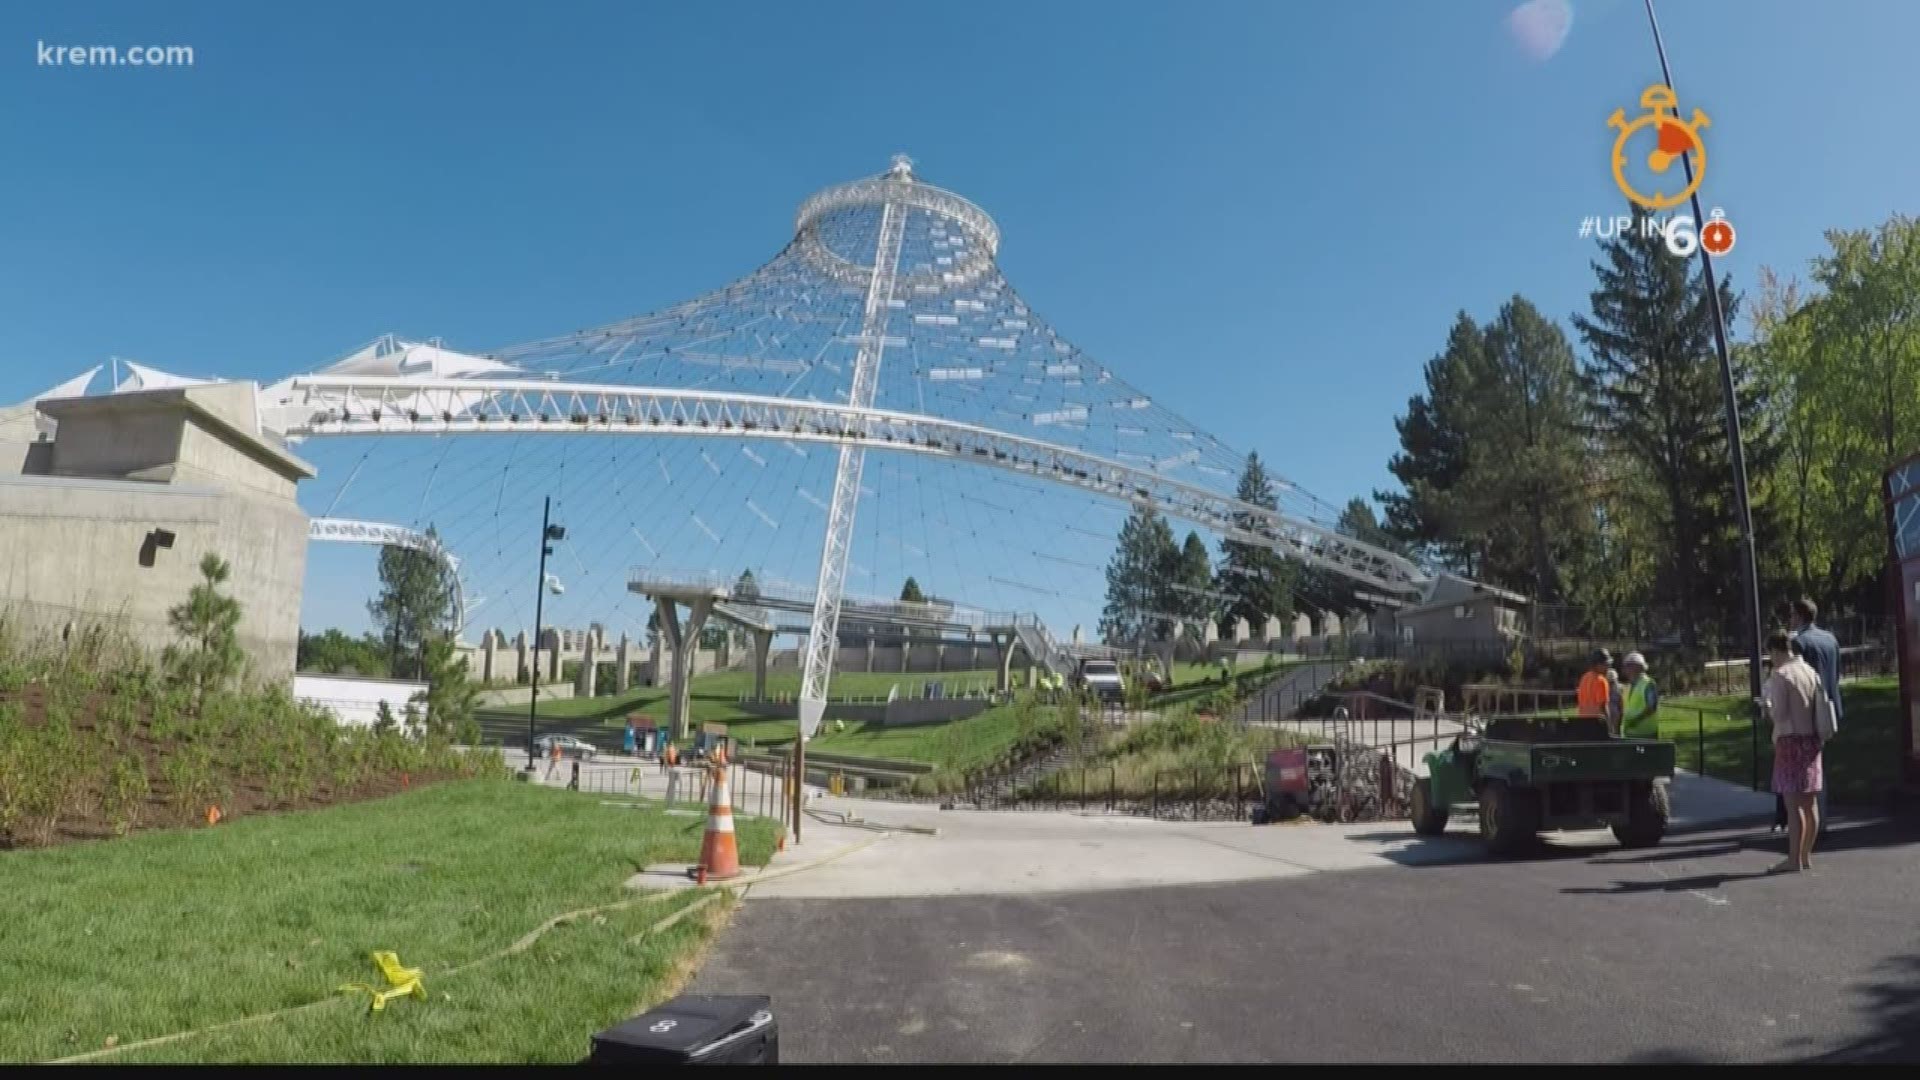 Spokane's legendary pavilion is set to reopen this weekend with a two day grand re-opening event scheduled for Friday and Saturday. The whole redesign process was a total of 7 years in the making and cost $24 million.